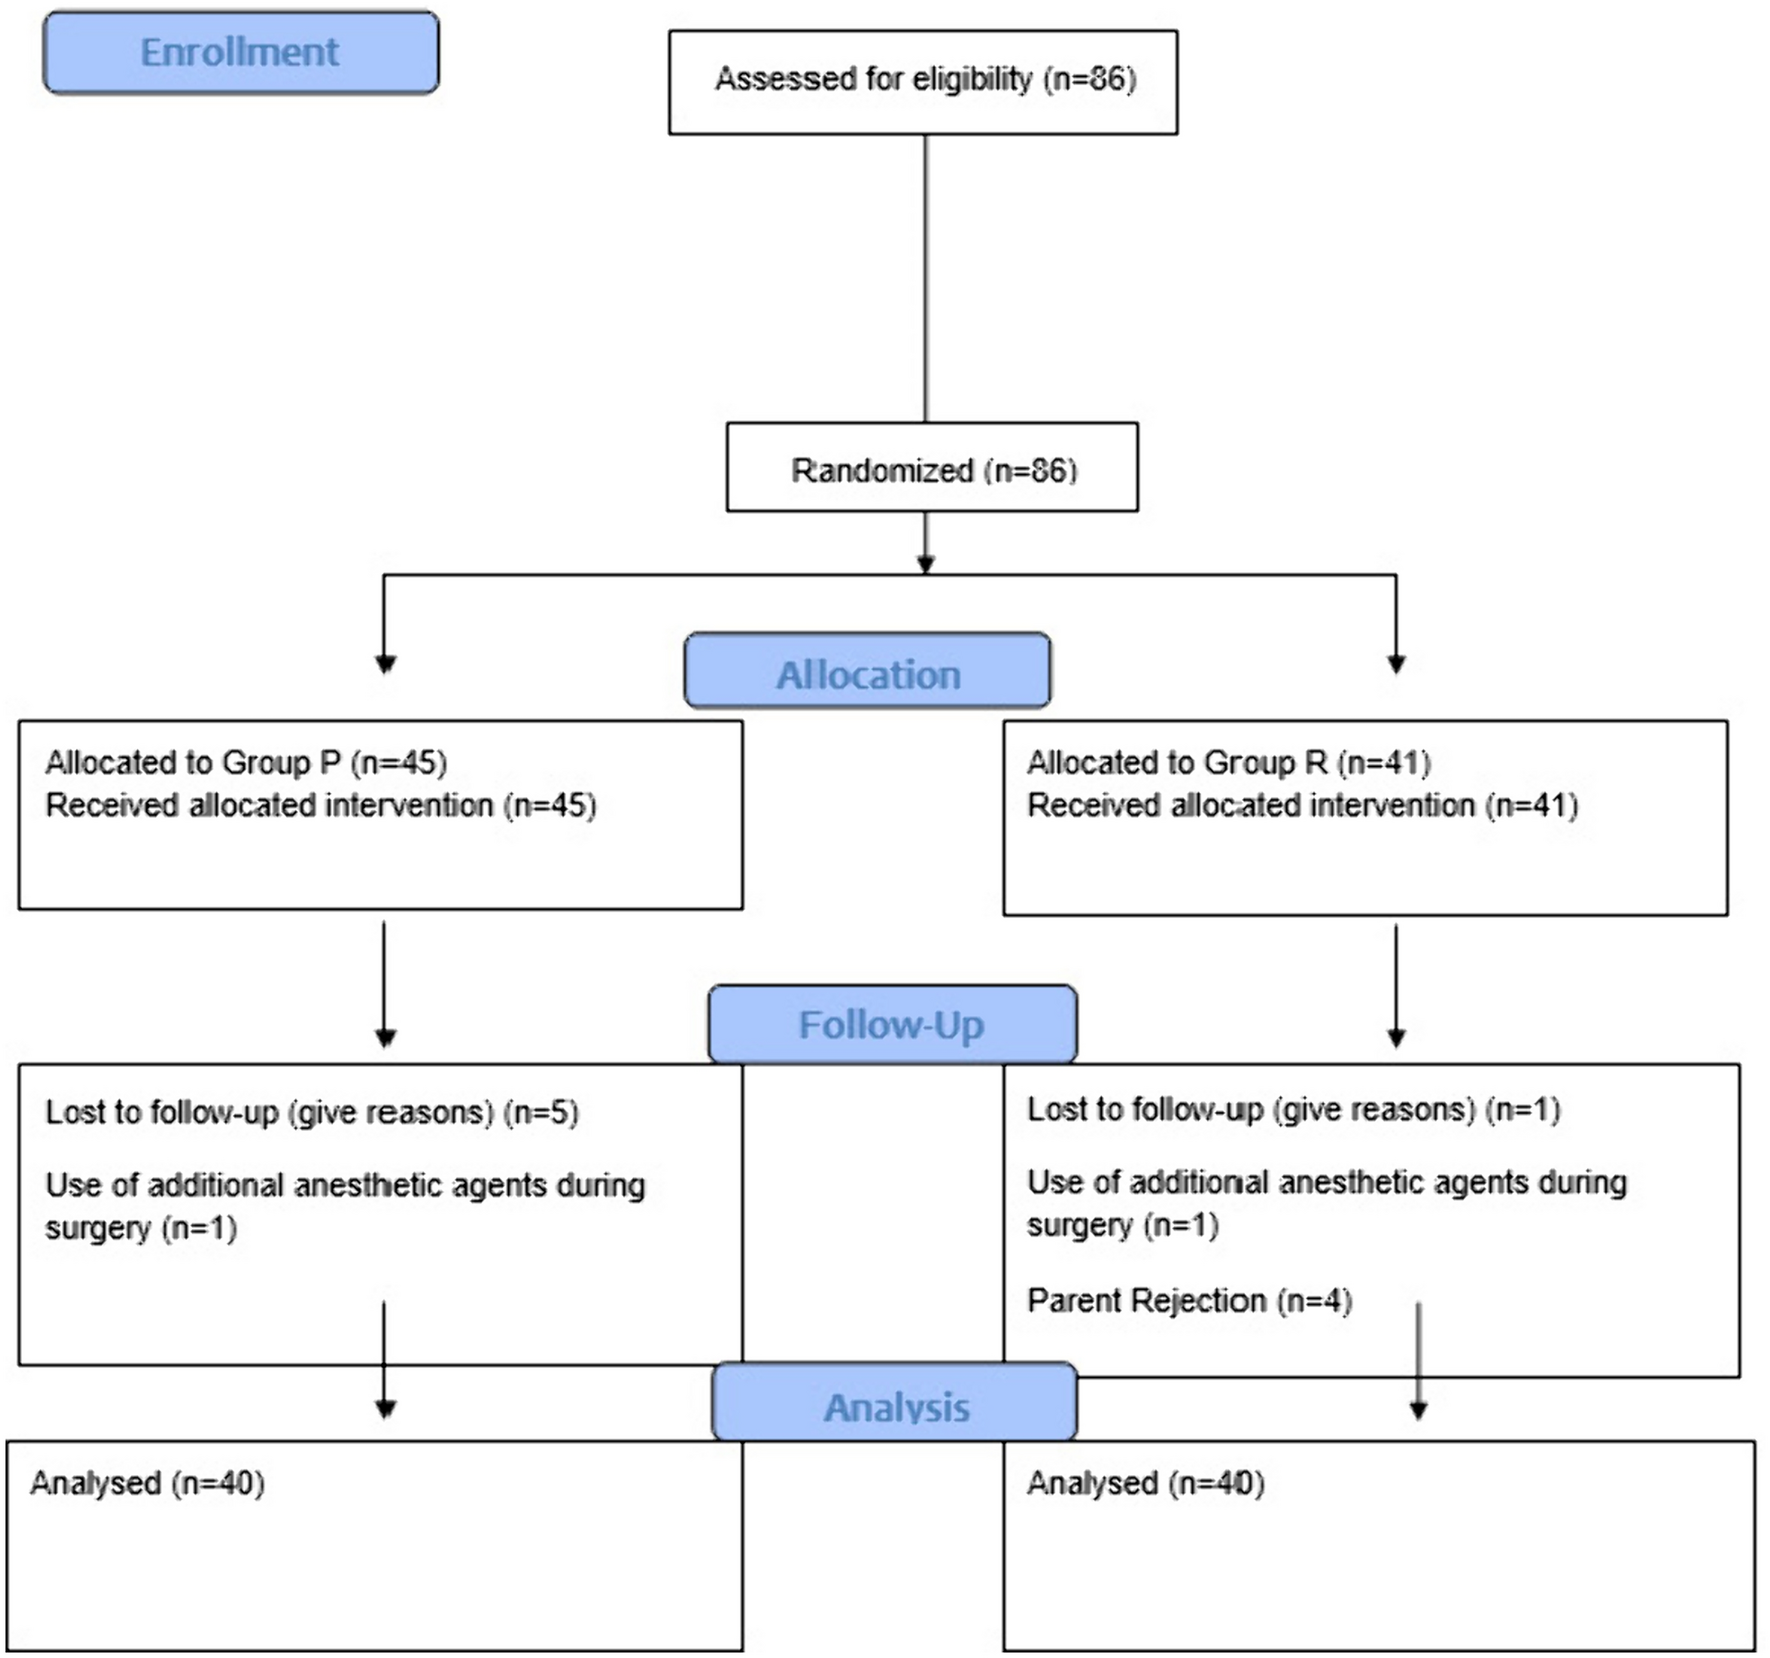 Comparison of the effects of ring block and dorsal penile nerve block on parental satisfaction for circumcision operation in children: randomized controlled trial